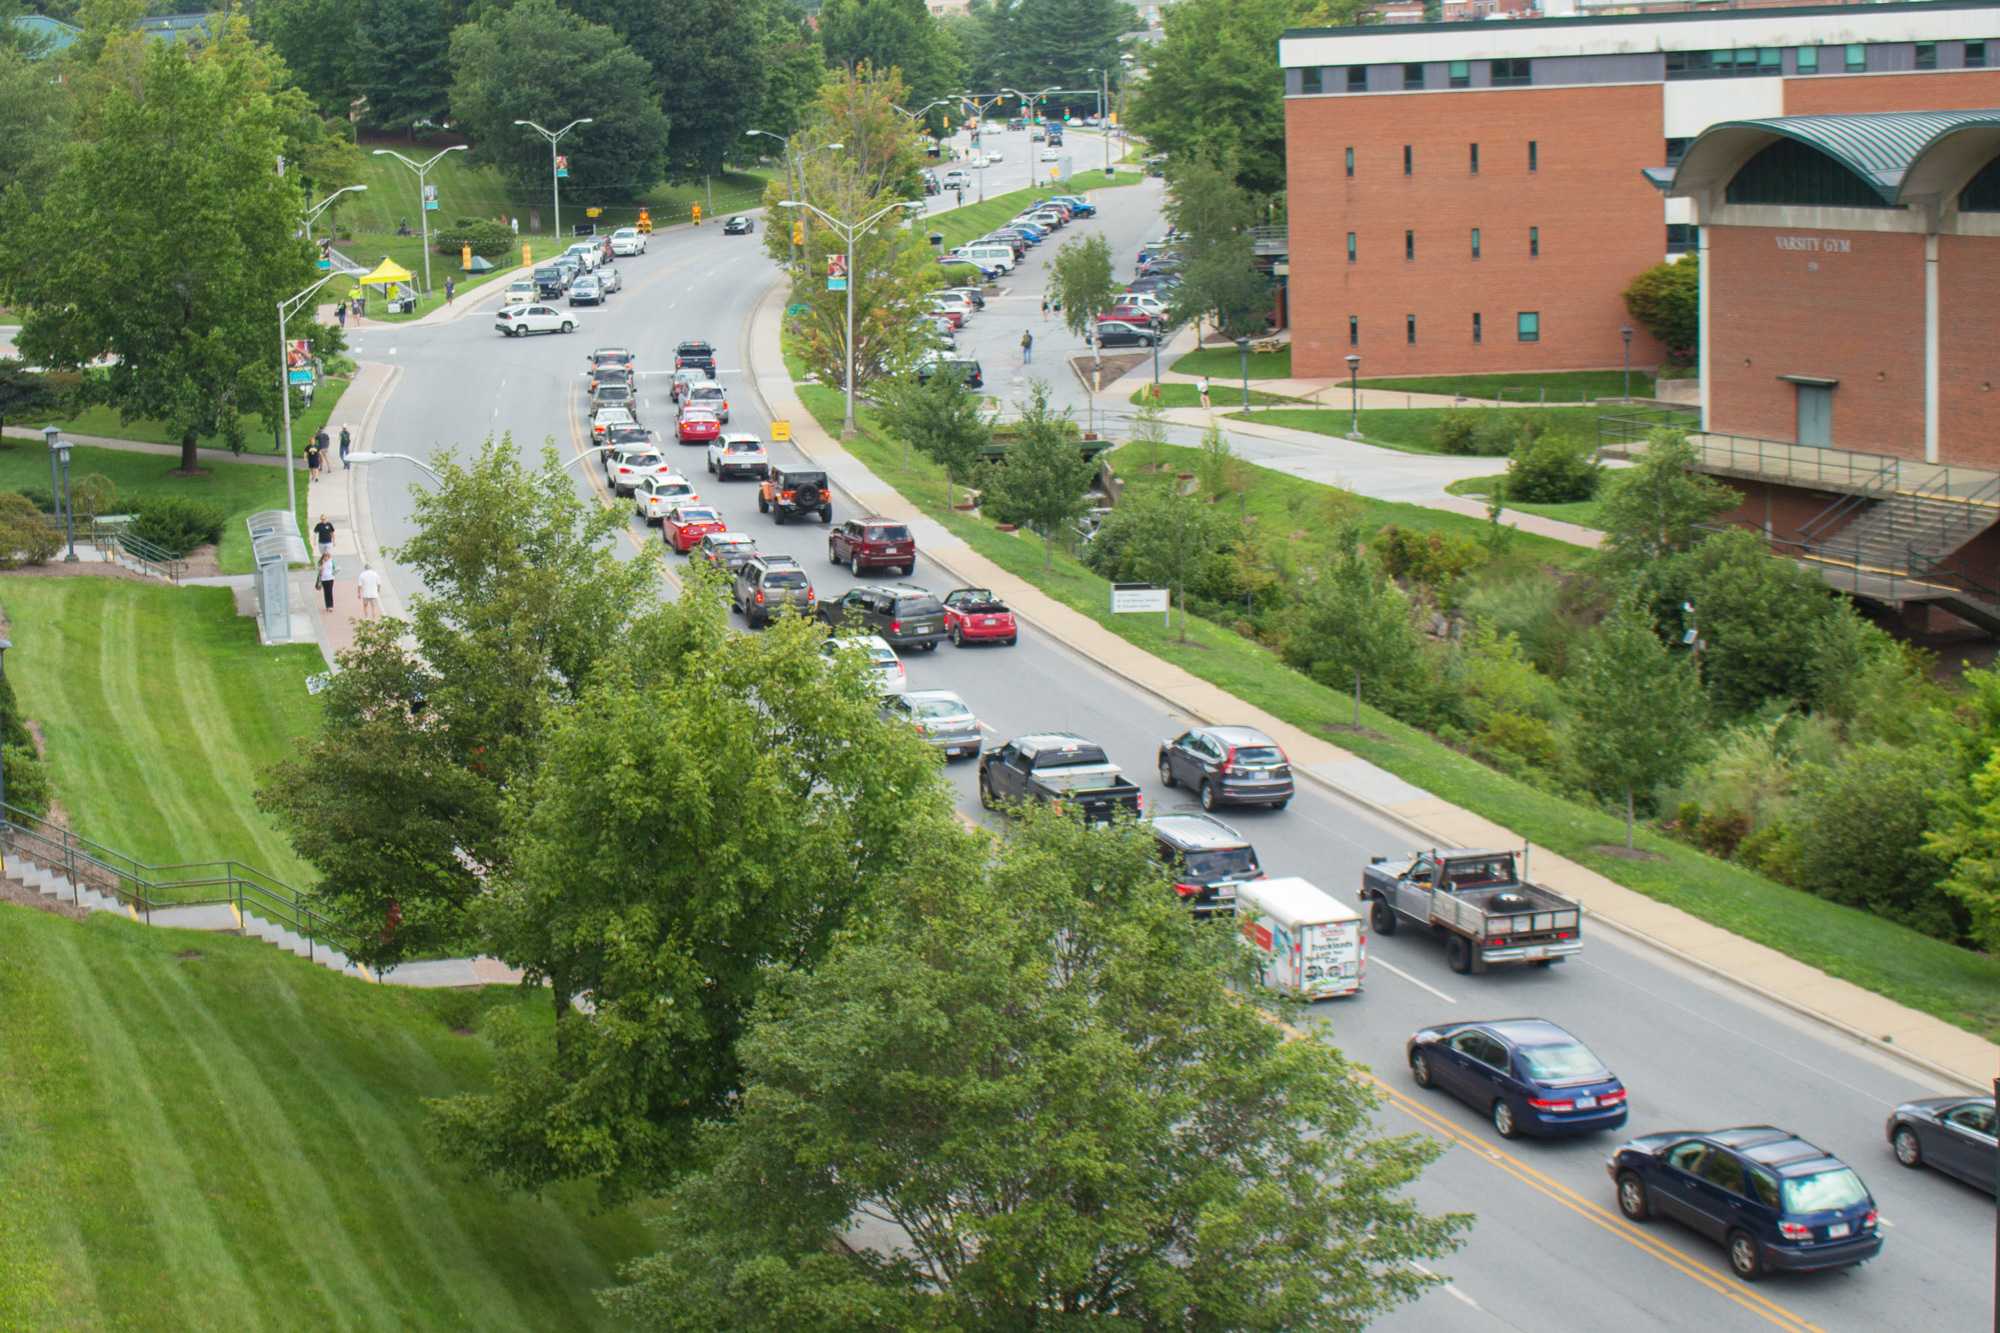 Heavy traffic persists throughout Boone all day Friday as students move into town. Photo by Aaron Moran